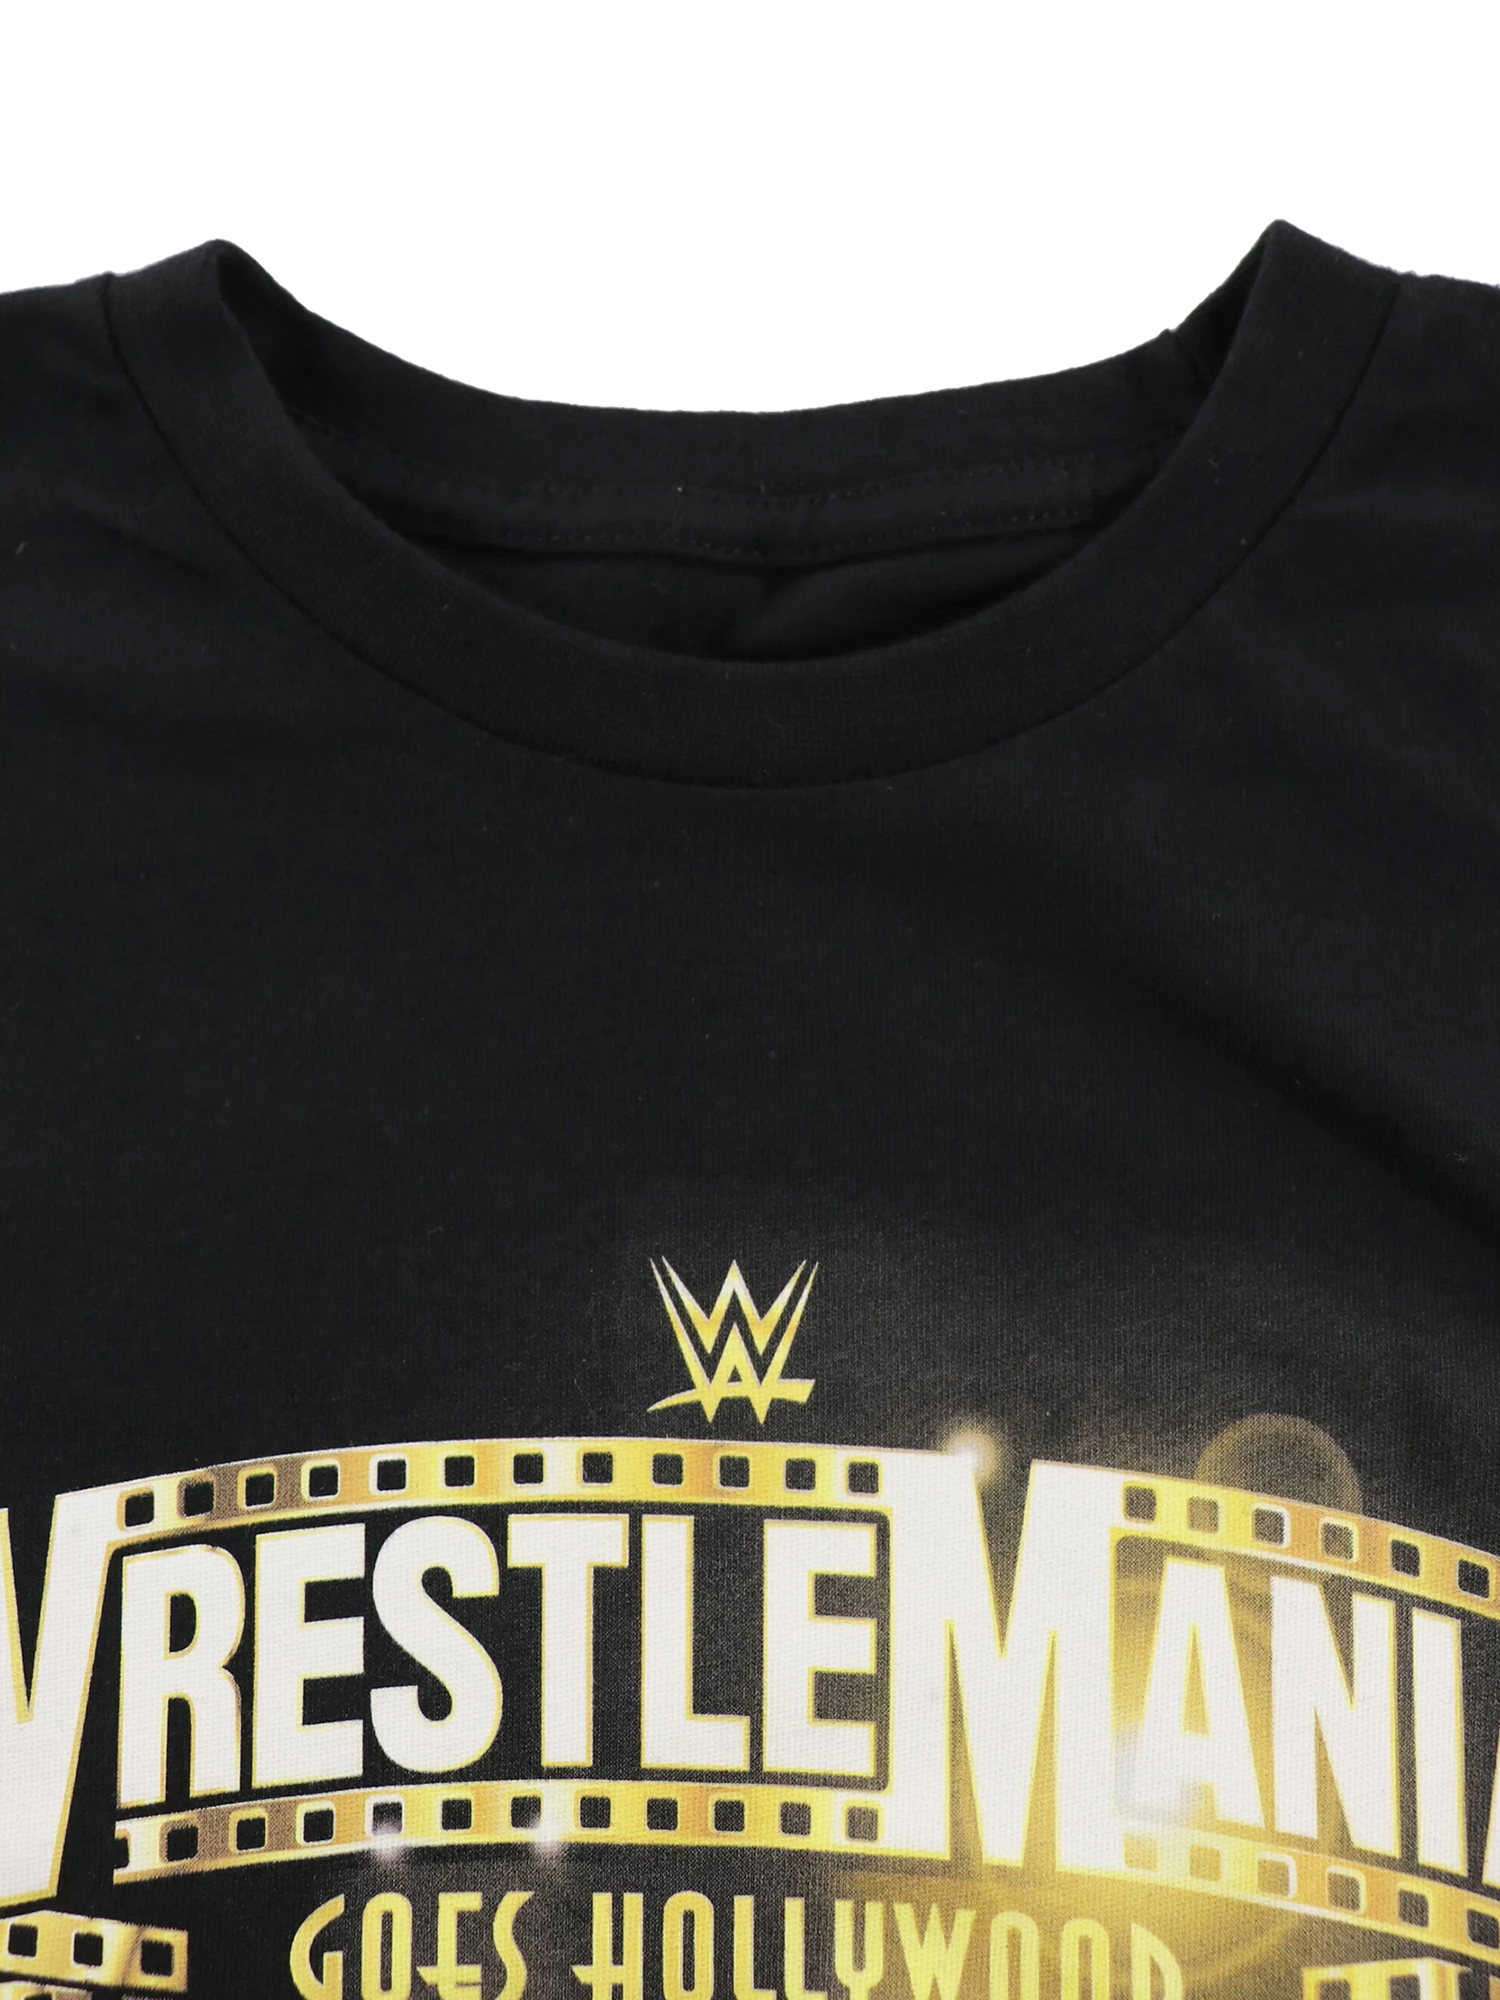 WWE レッスルマニア39 ロングスリーブシャツ BRANDED WM39 EVENT LS TEE COLLAB